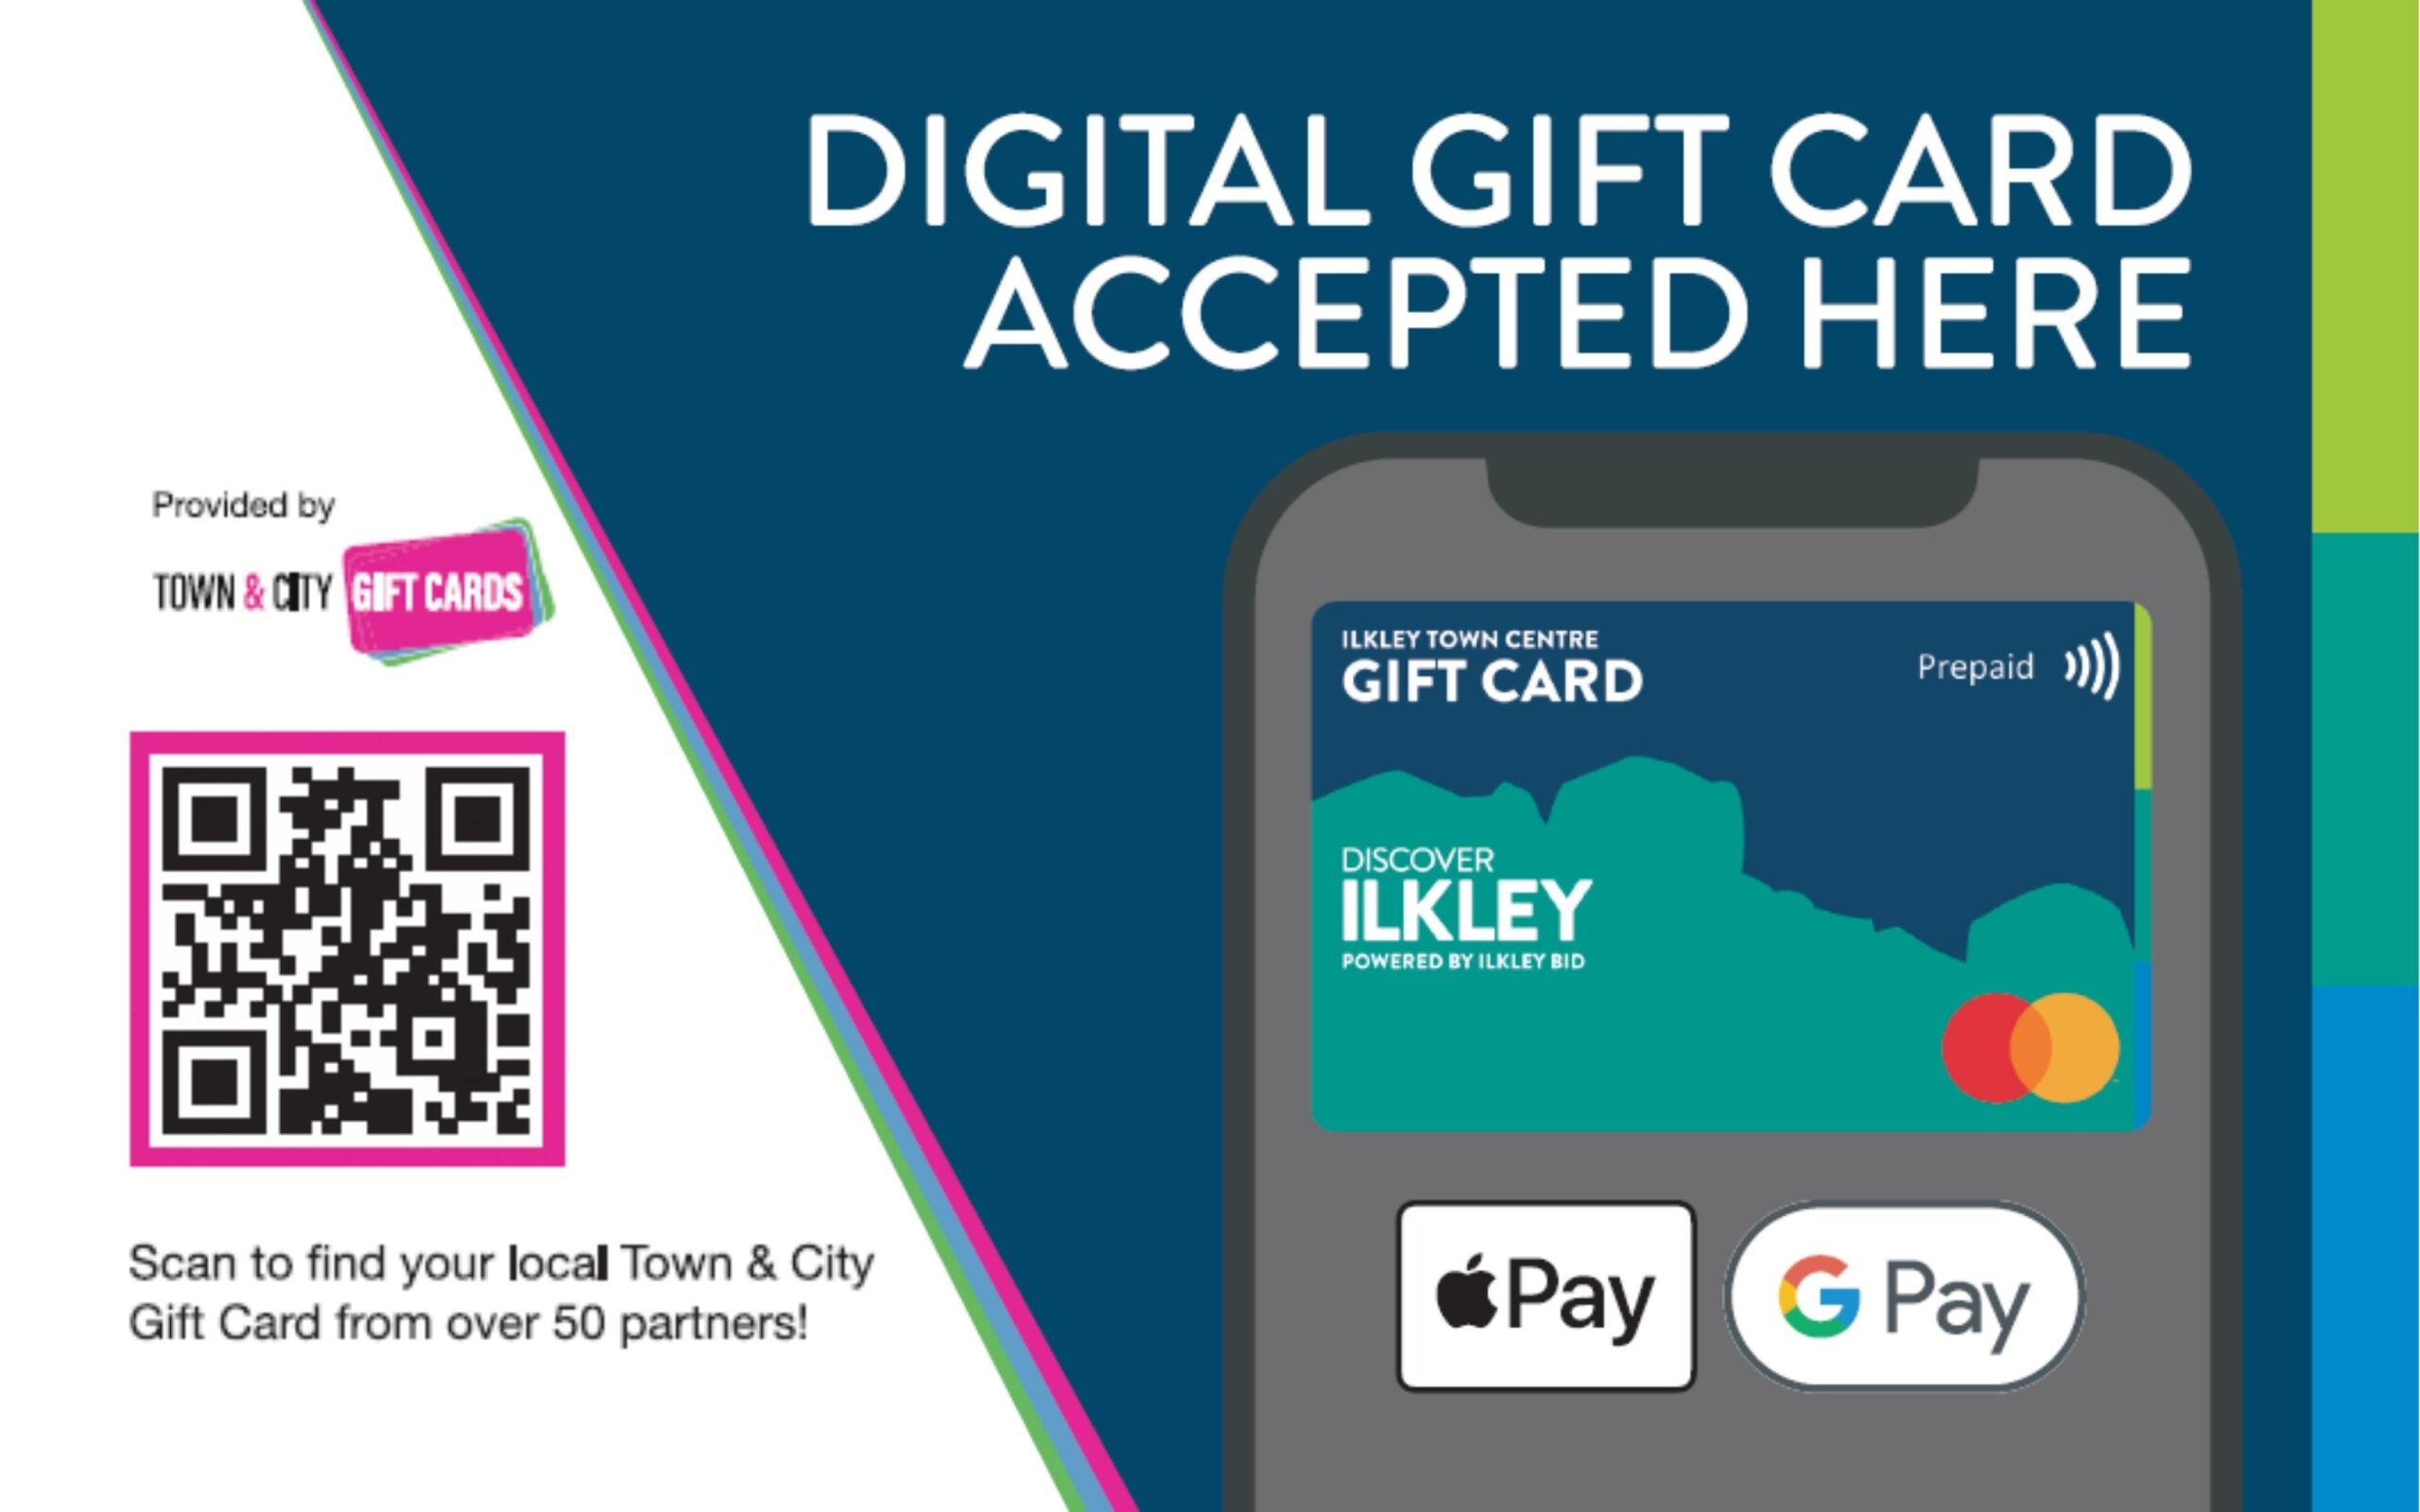 register for the Ilkley Gift card now